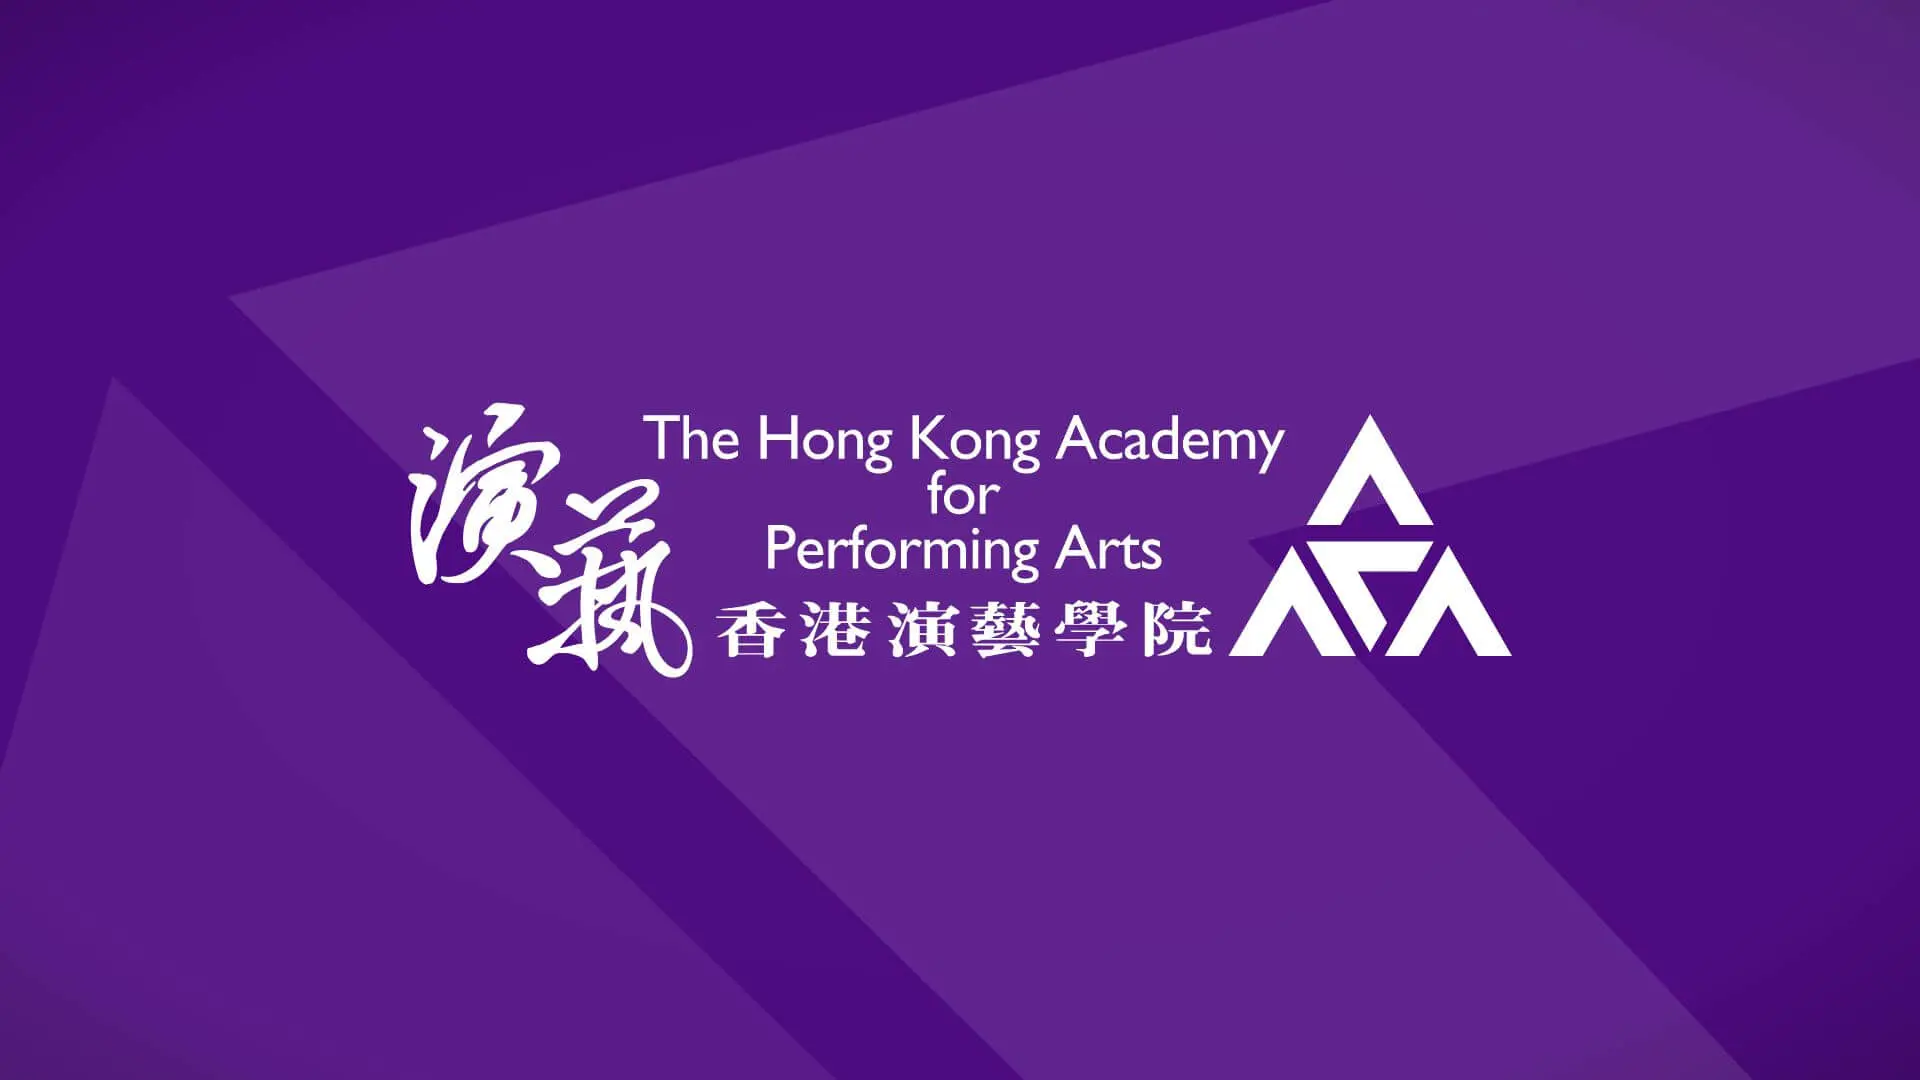 (Cancelled) Academy Postgraduate Music Lecture-Demonstration - Lui Pak-hay Patrick (Composition)